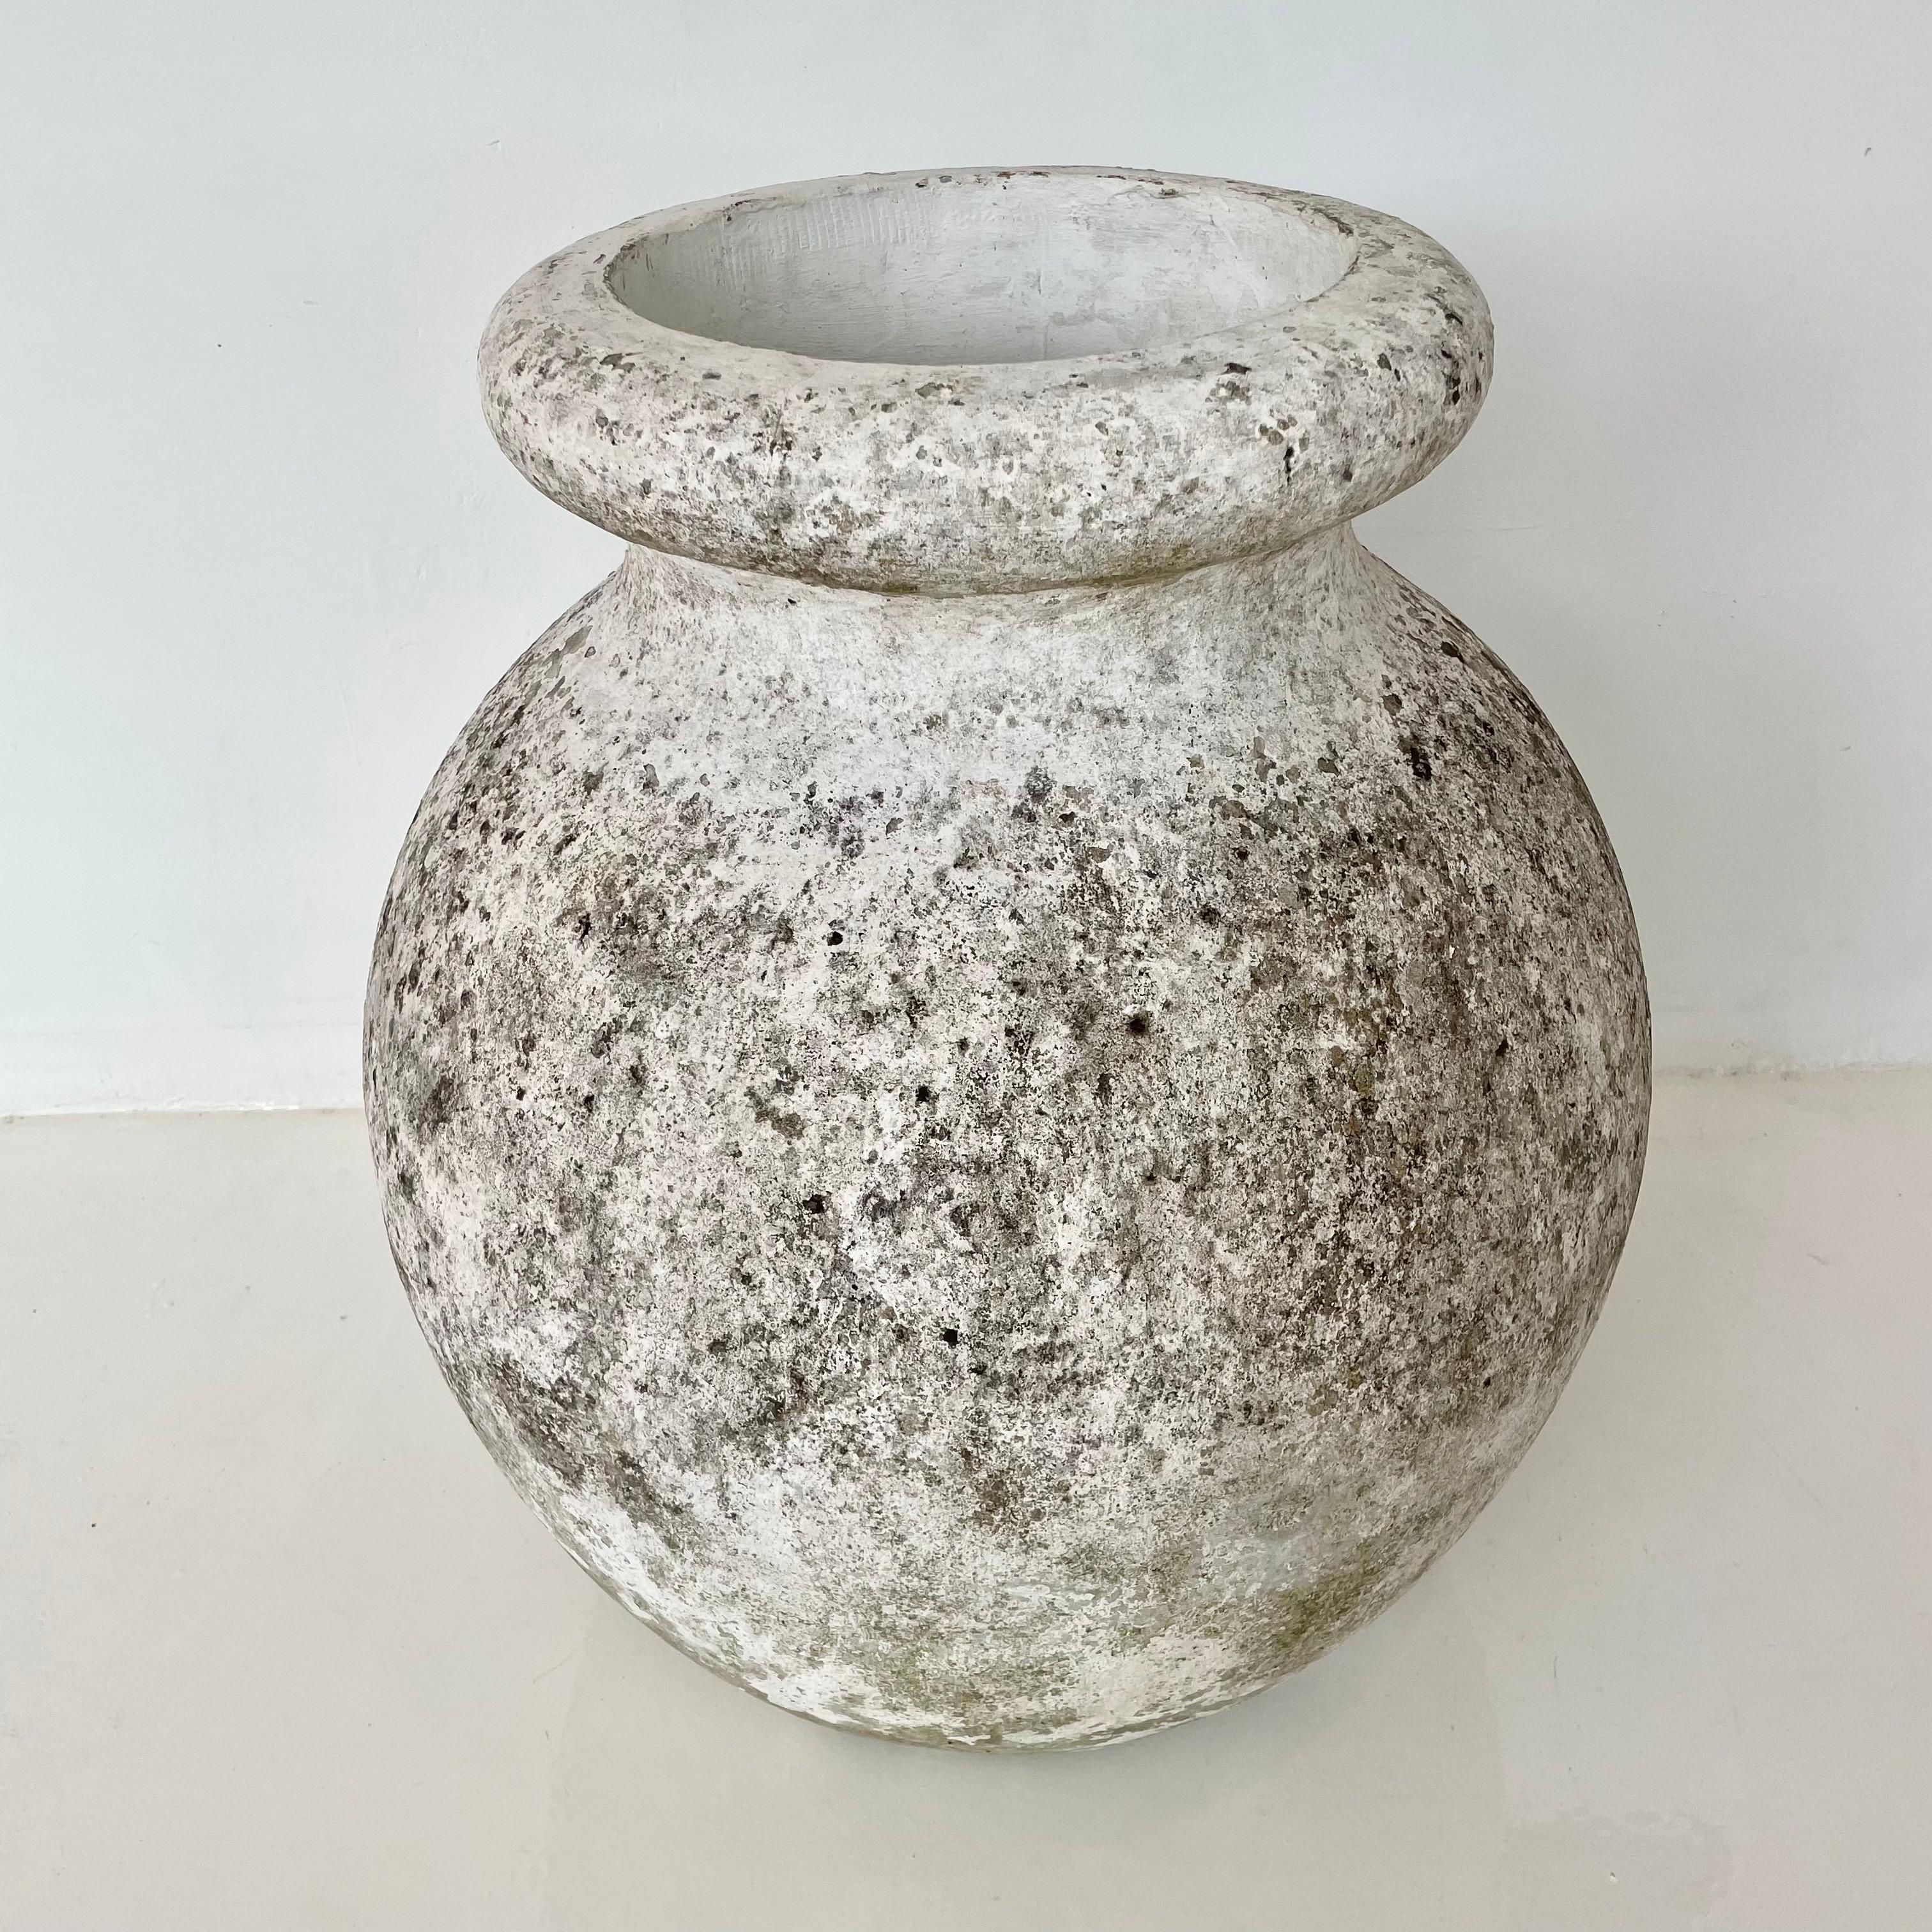 Gigantic concrete urn planter by Willy Guhl, with great patina and prominent presence. Simple and elegant design perfect for any garden or patio. Small drainage hole on the side pictured below.

Mouth opening measures 11.5